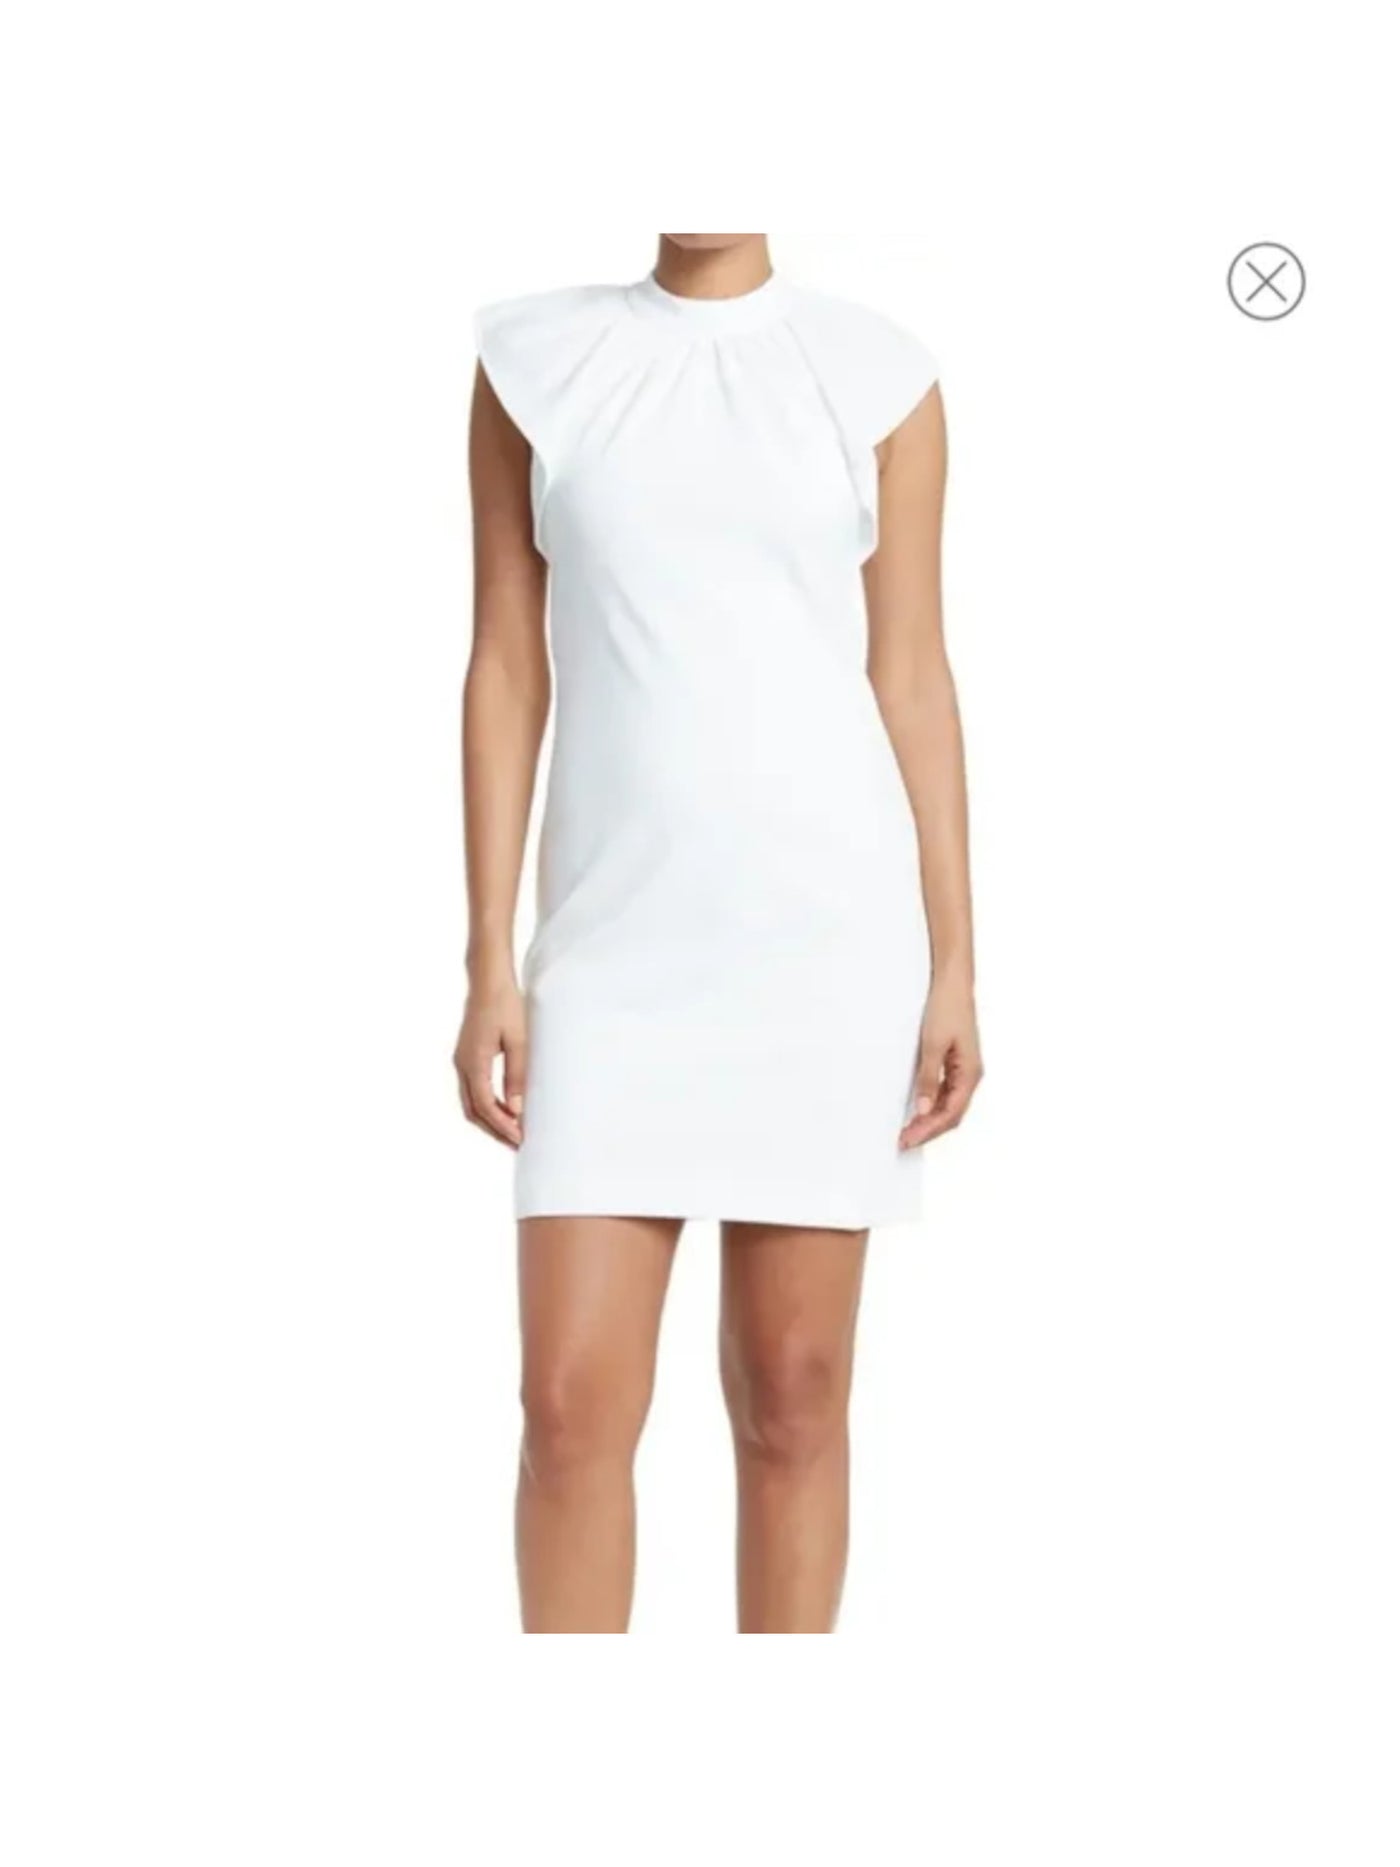 CALVIN KLEIN Womens Ivory Stretch Ruched Zippered Ruffle Cap Sleeves Mock Neck Above The Knee Wear To Work Sheath Dress 6